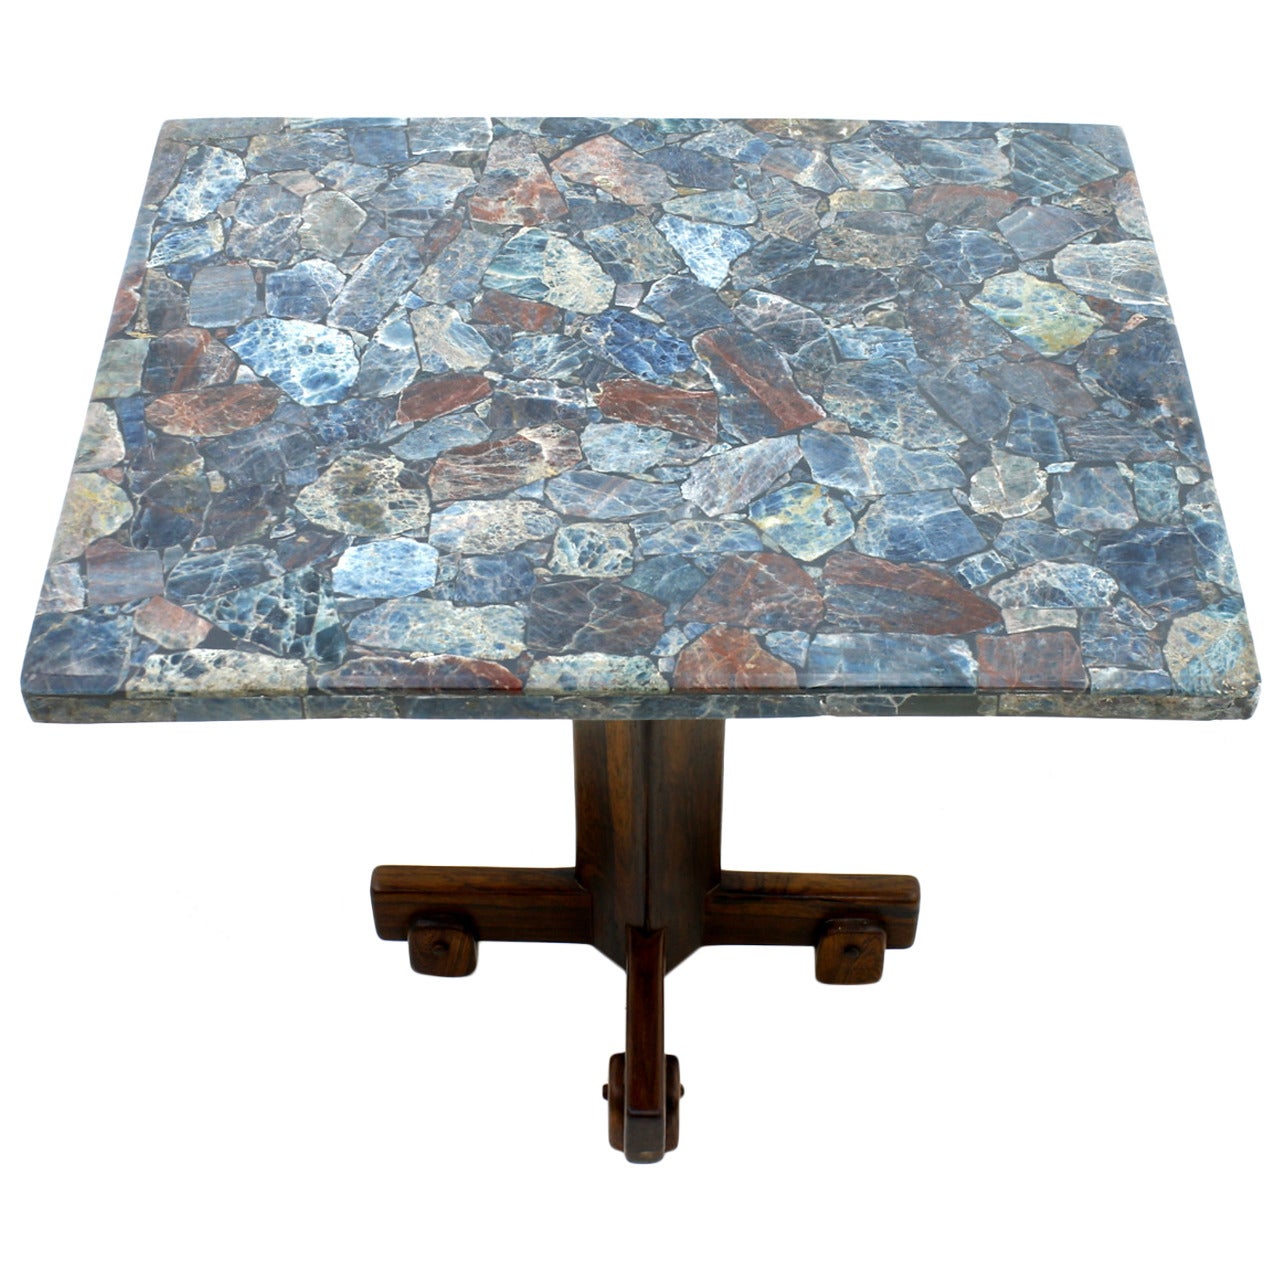 Rare Sergio Rodrigues Side Table with Stone Mosaic Tabletop, Brazil, 1964